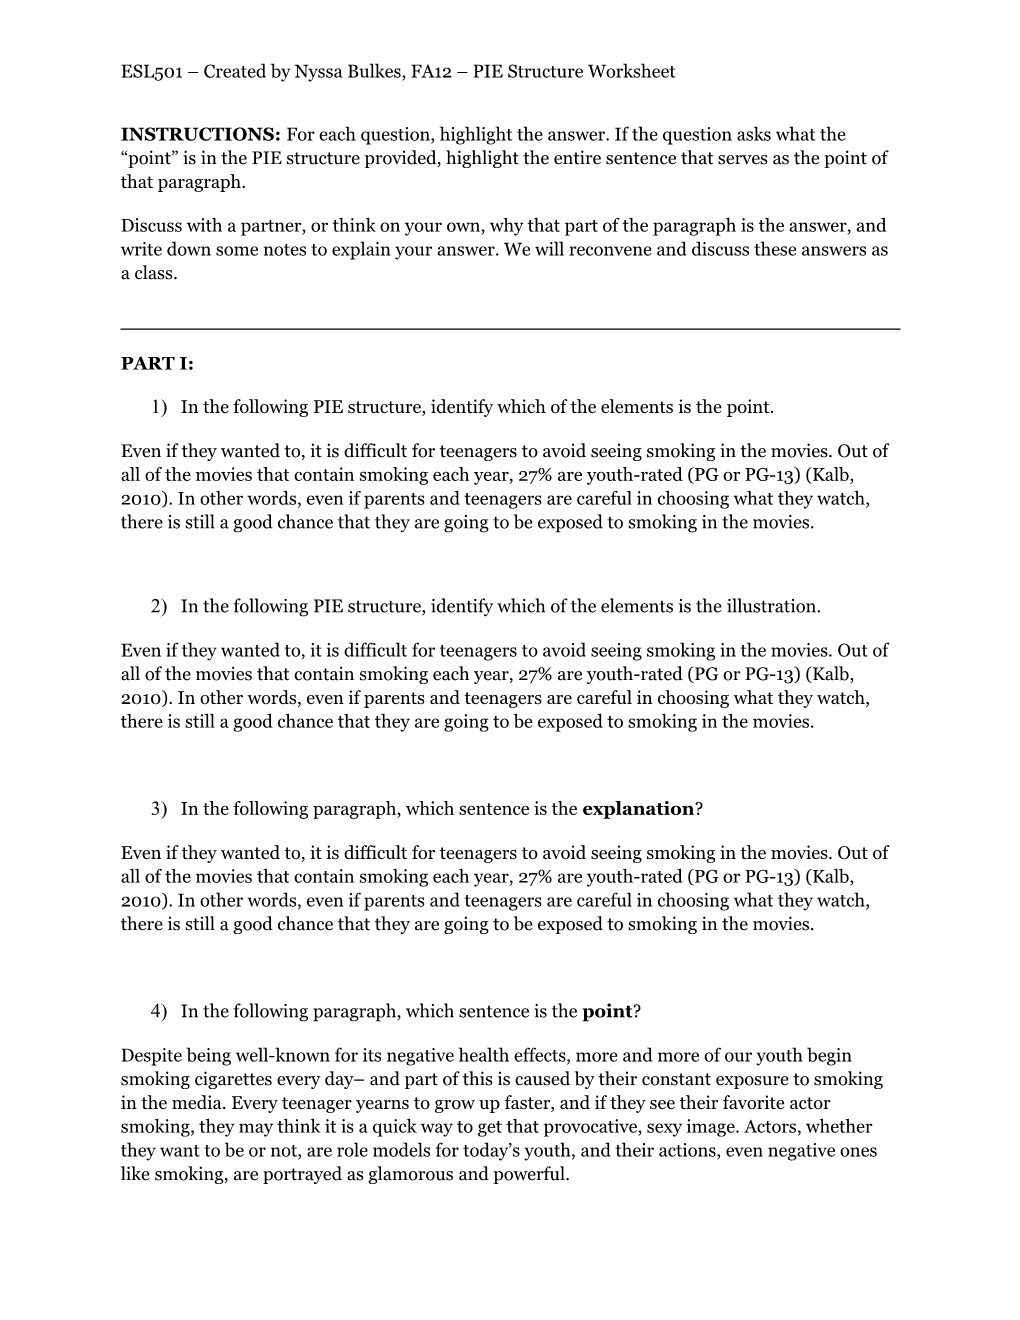 ESL501 Created by Nyssa Bulkes, FA12 PIE Structure Worksheet